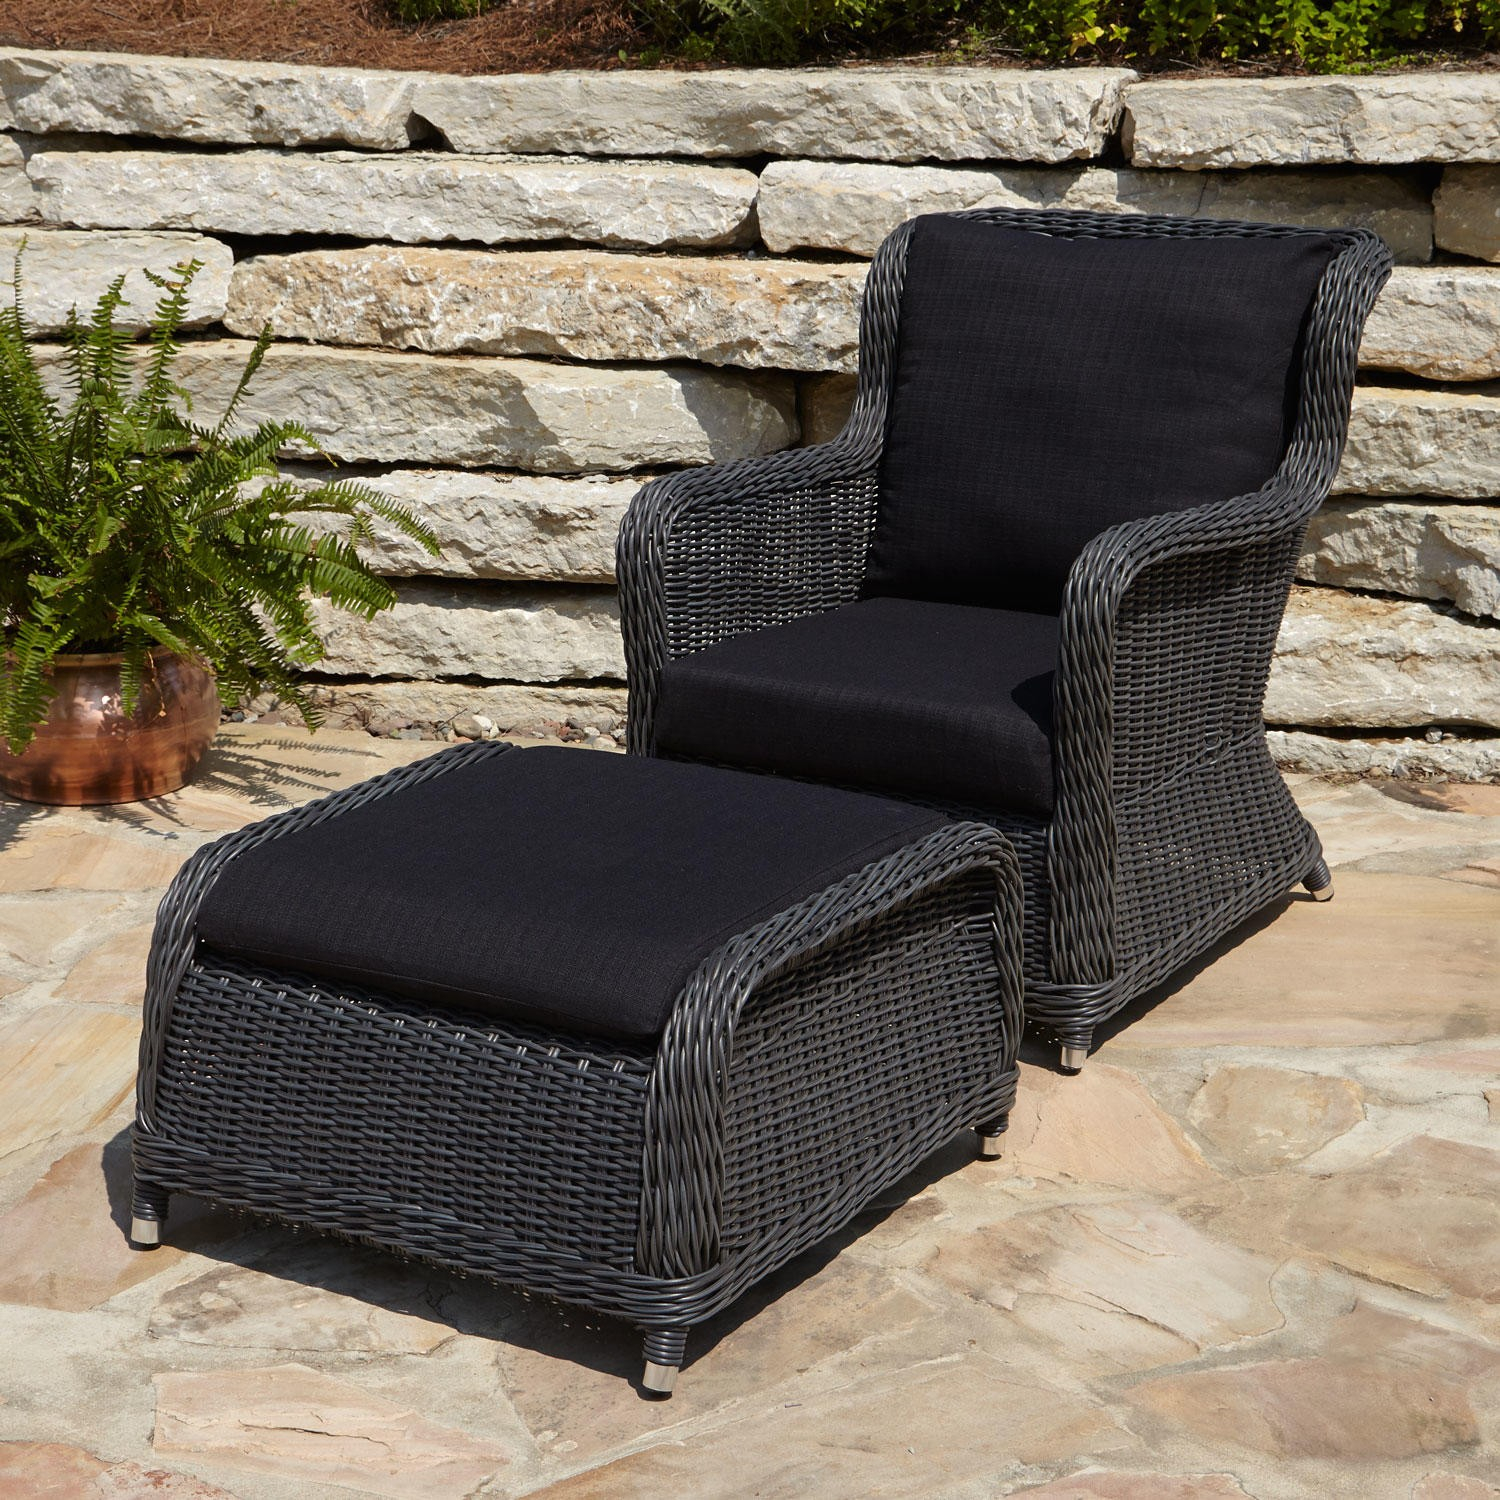 Furniture Lovely Kmart Patio Cushions For Comfy Patio throughout measurements 1500 X 1500